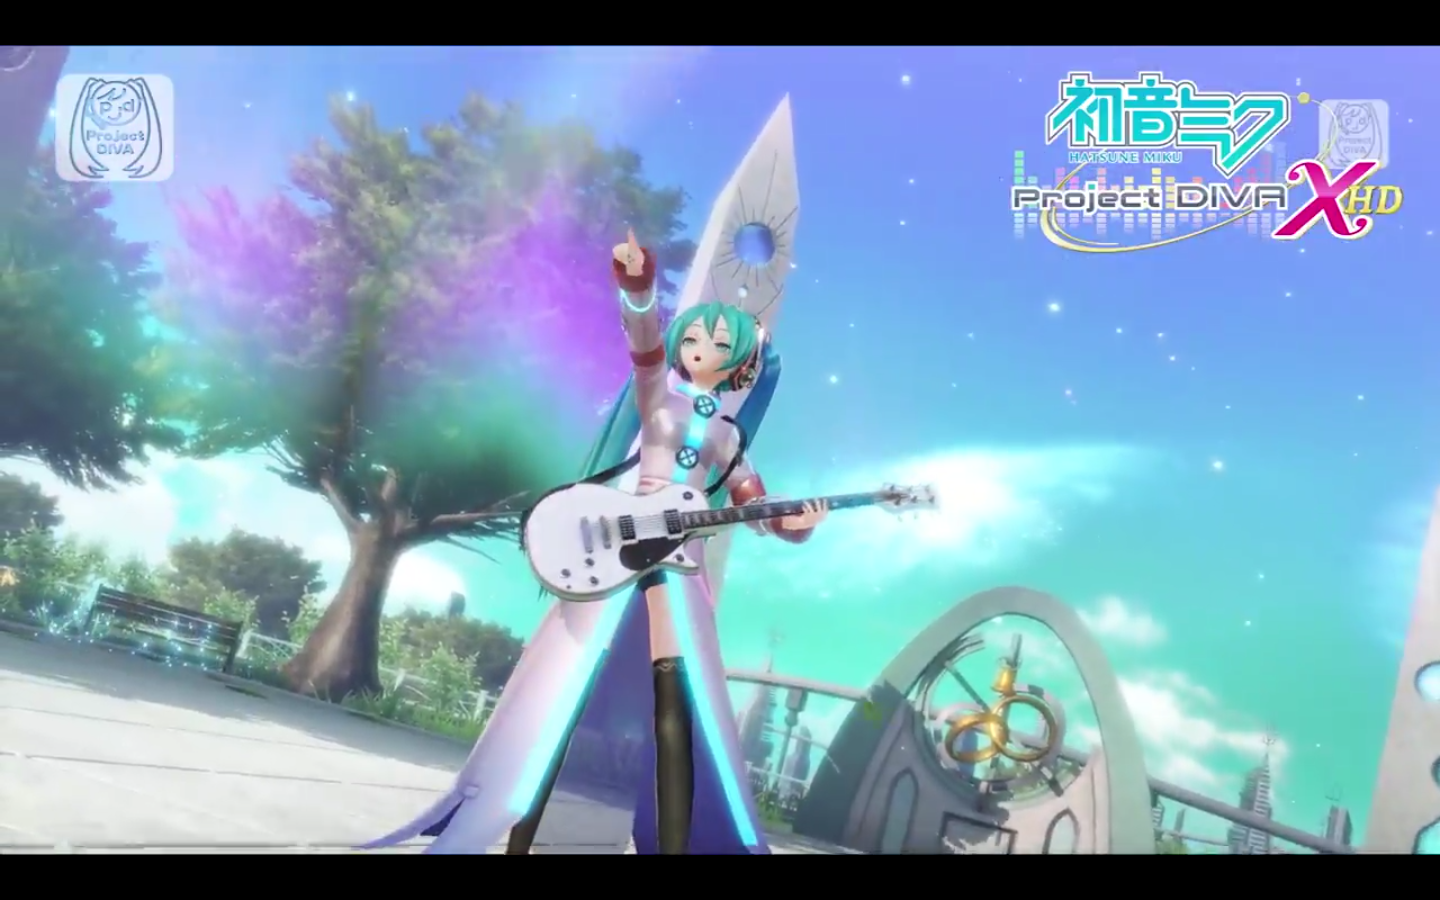 Project DIVA X Overview trailer